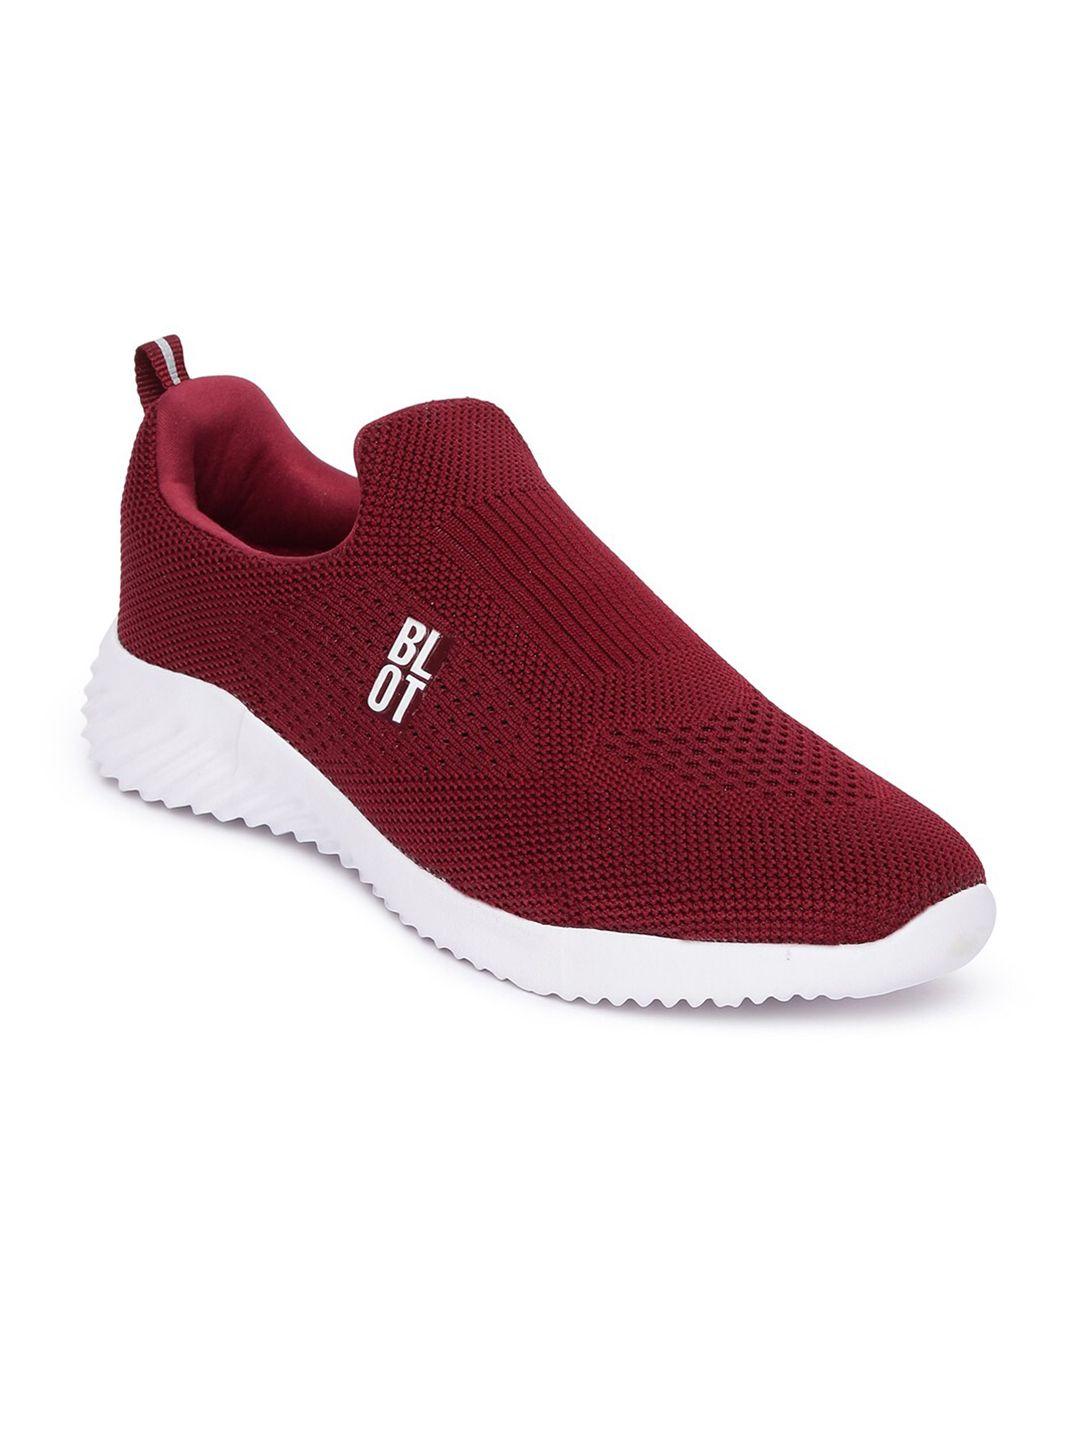 paragon-men-maroon-canvas-running-knitted-sports-shoes